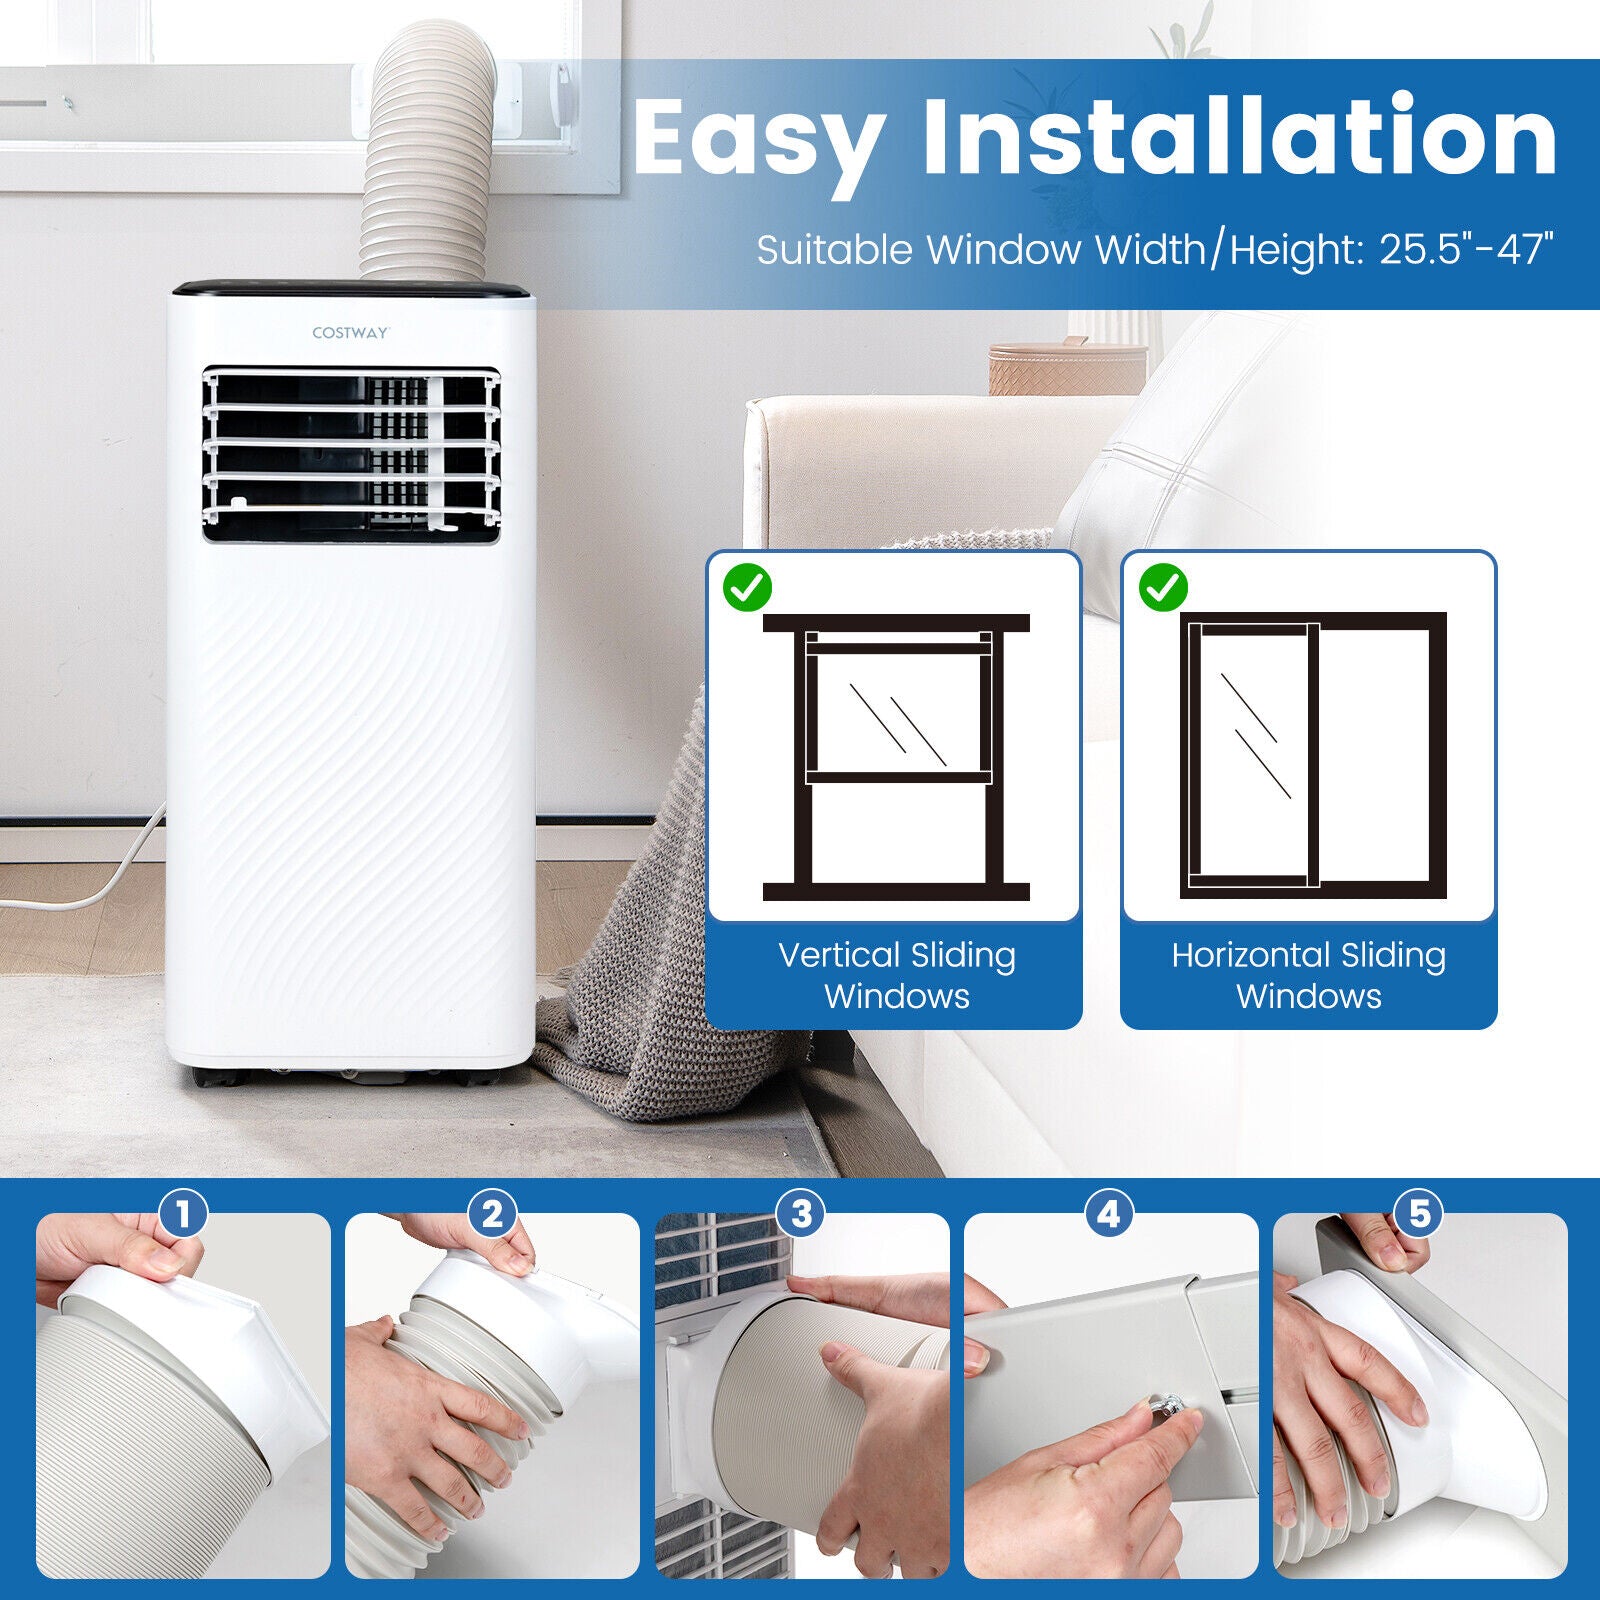 Easy Installation and User-Friendly Features: The included window kit provides easy installation to most sizes of windows and the suitable window width/height is 25.5"-47". And the carry handles and universal wheels help you with movement from room to room. The removable and washable filter makes regular cleaning easier.